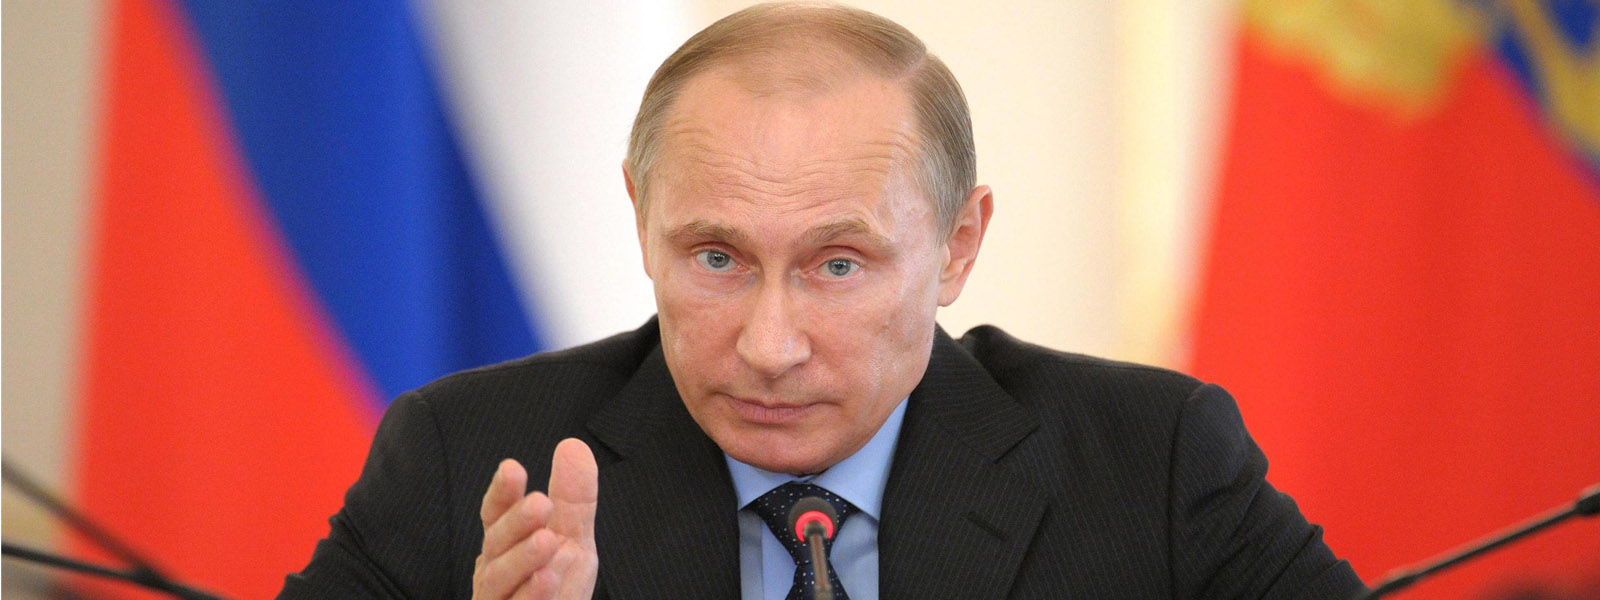 Putin most likely to gain fourth presidential term